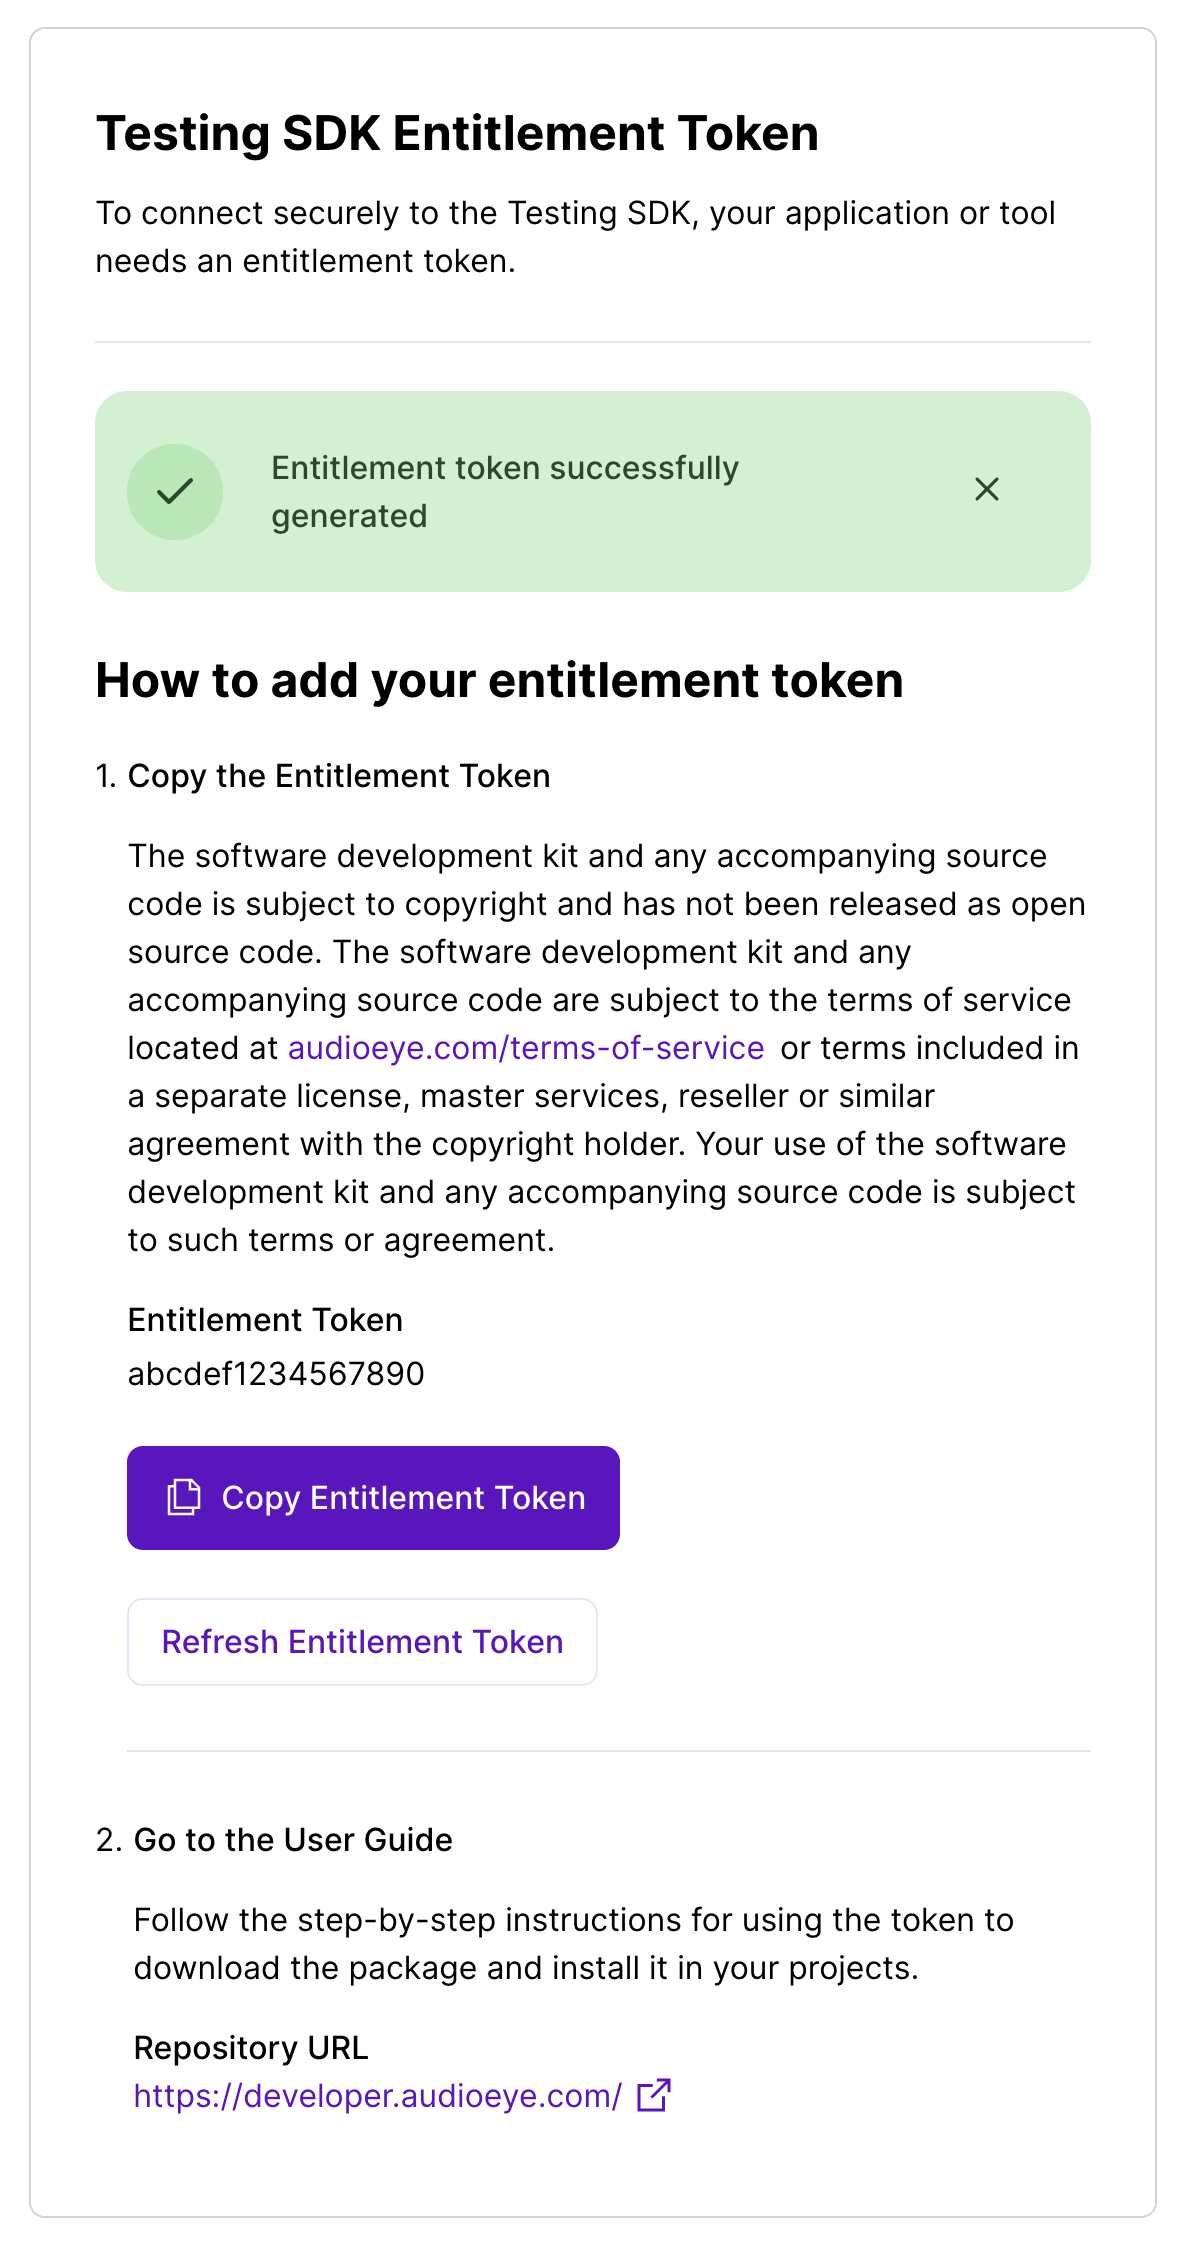 Screenshot of a portion of the My Account page on the AudioEye Customer Portal. The screenshot shows the Testing SDK Entitlement Token card after successfully creating an entitlement token. A successful notification is shown, information about the token is listed, and two buttons are present. The first button has the label &quot;Copy Entitlement Token&quot; and the second is labeled &quot;Refresh Entitlement Token&quot;